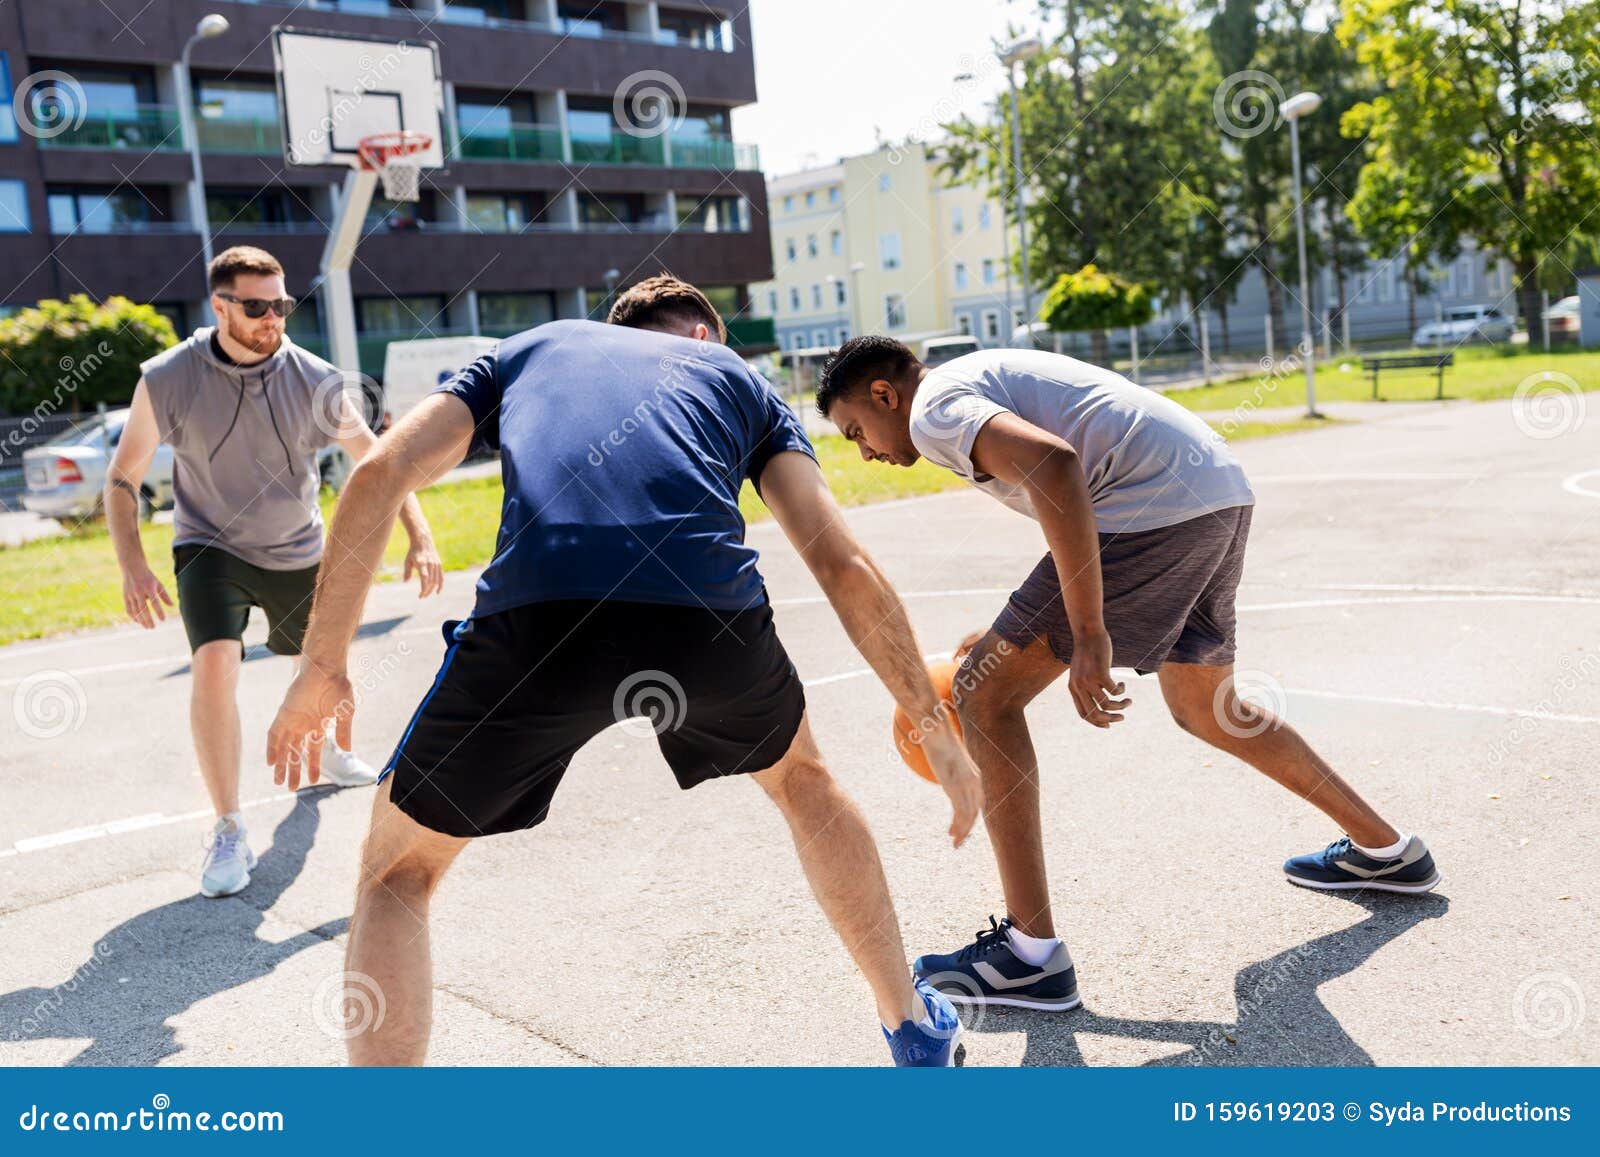 Group of Male Friends Playing Street Basketball Stock Image - Image of ...